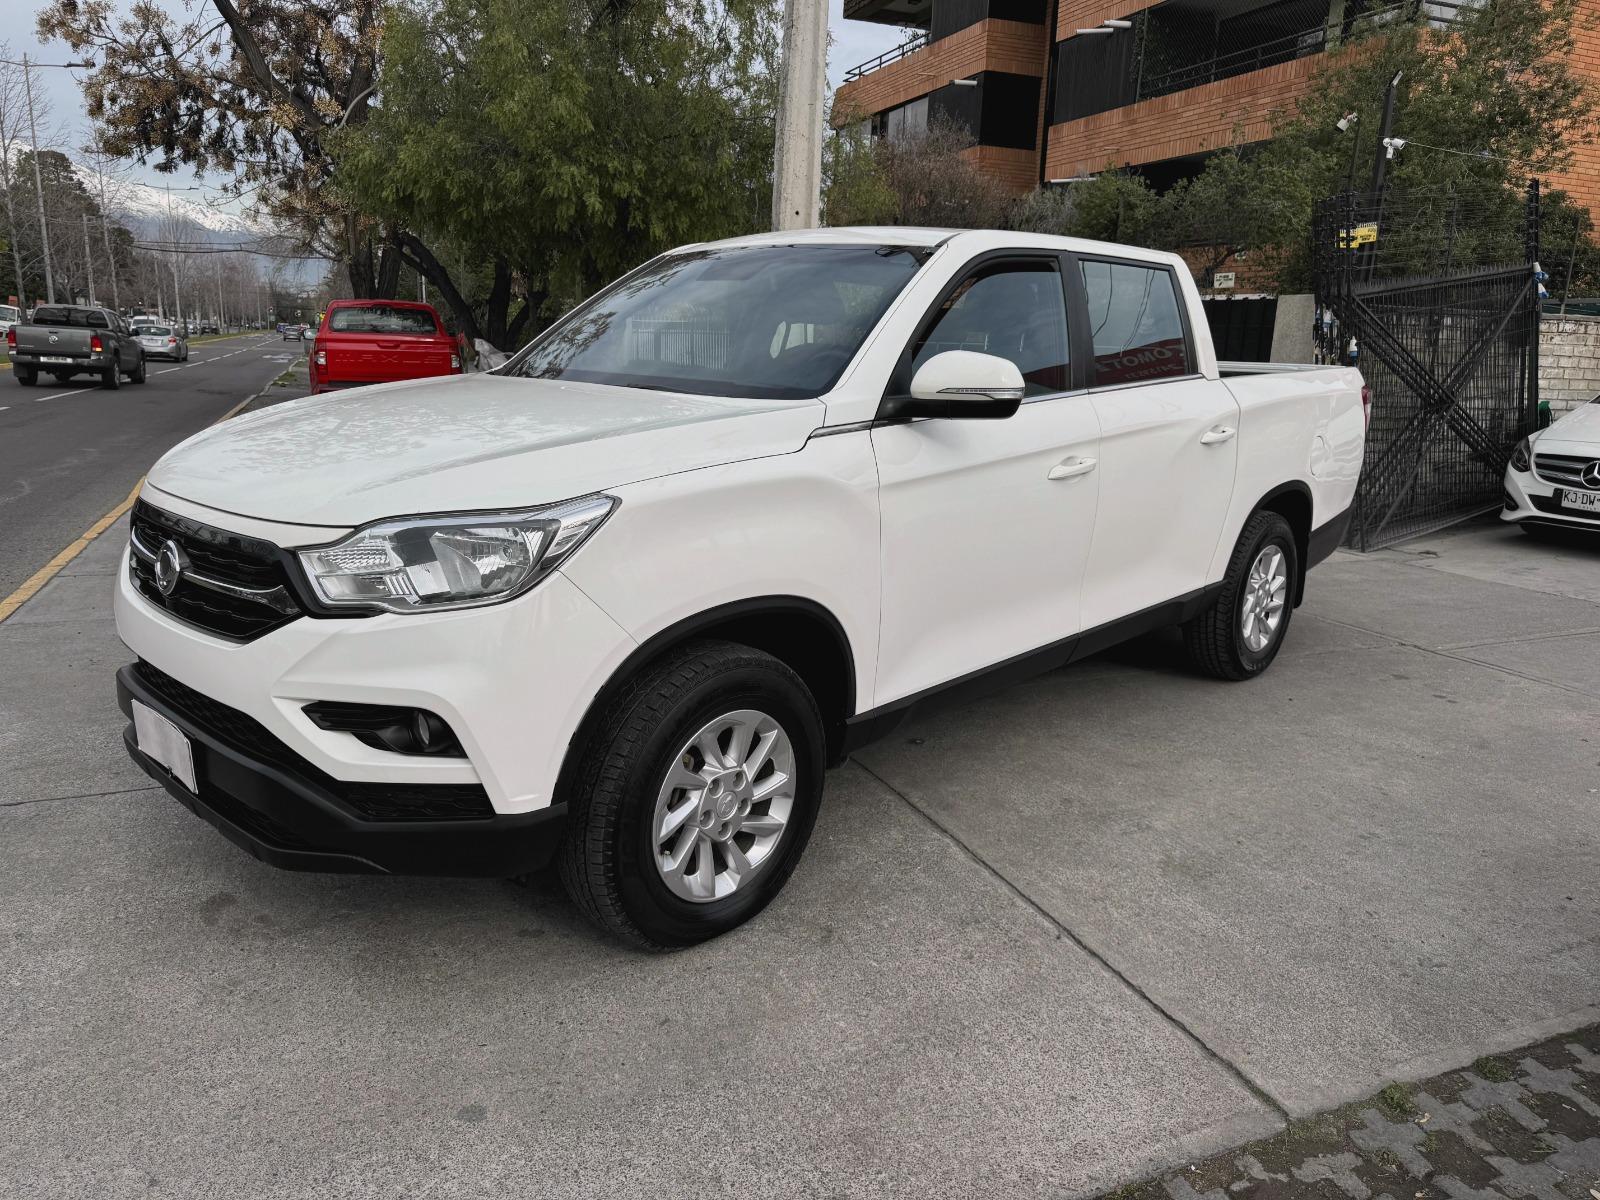 SSANGYONG MUSSO GLX 2.2 AUTOMATICA 2021 FULL AIRE AIRBAG ABS - FULL MOTOR